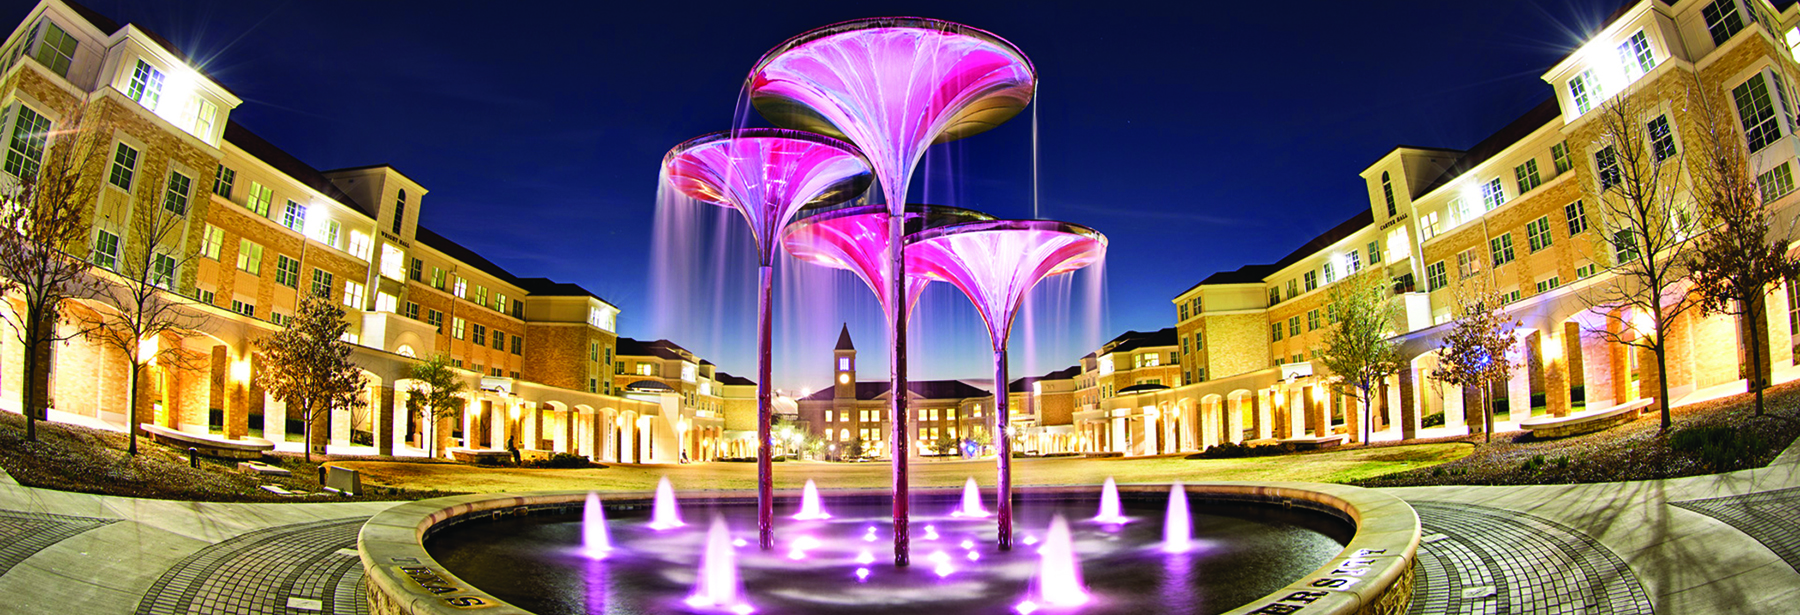 Section Image: Frog Fountain at night 